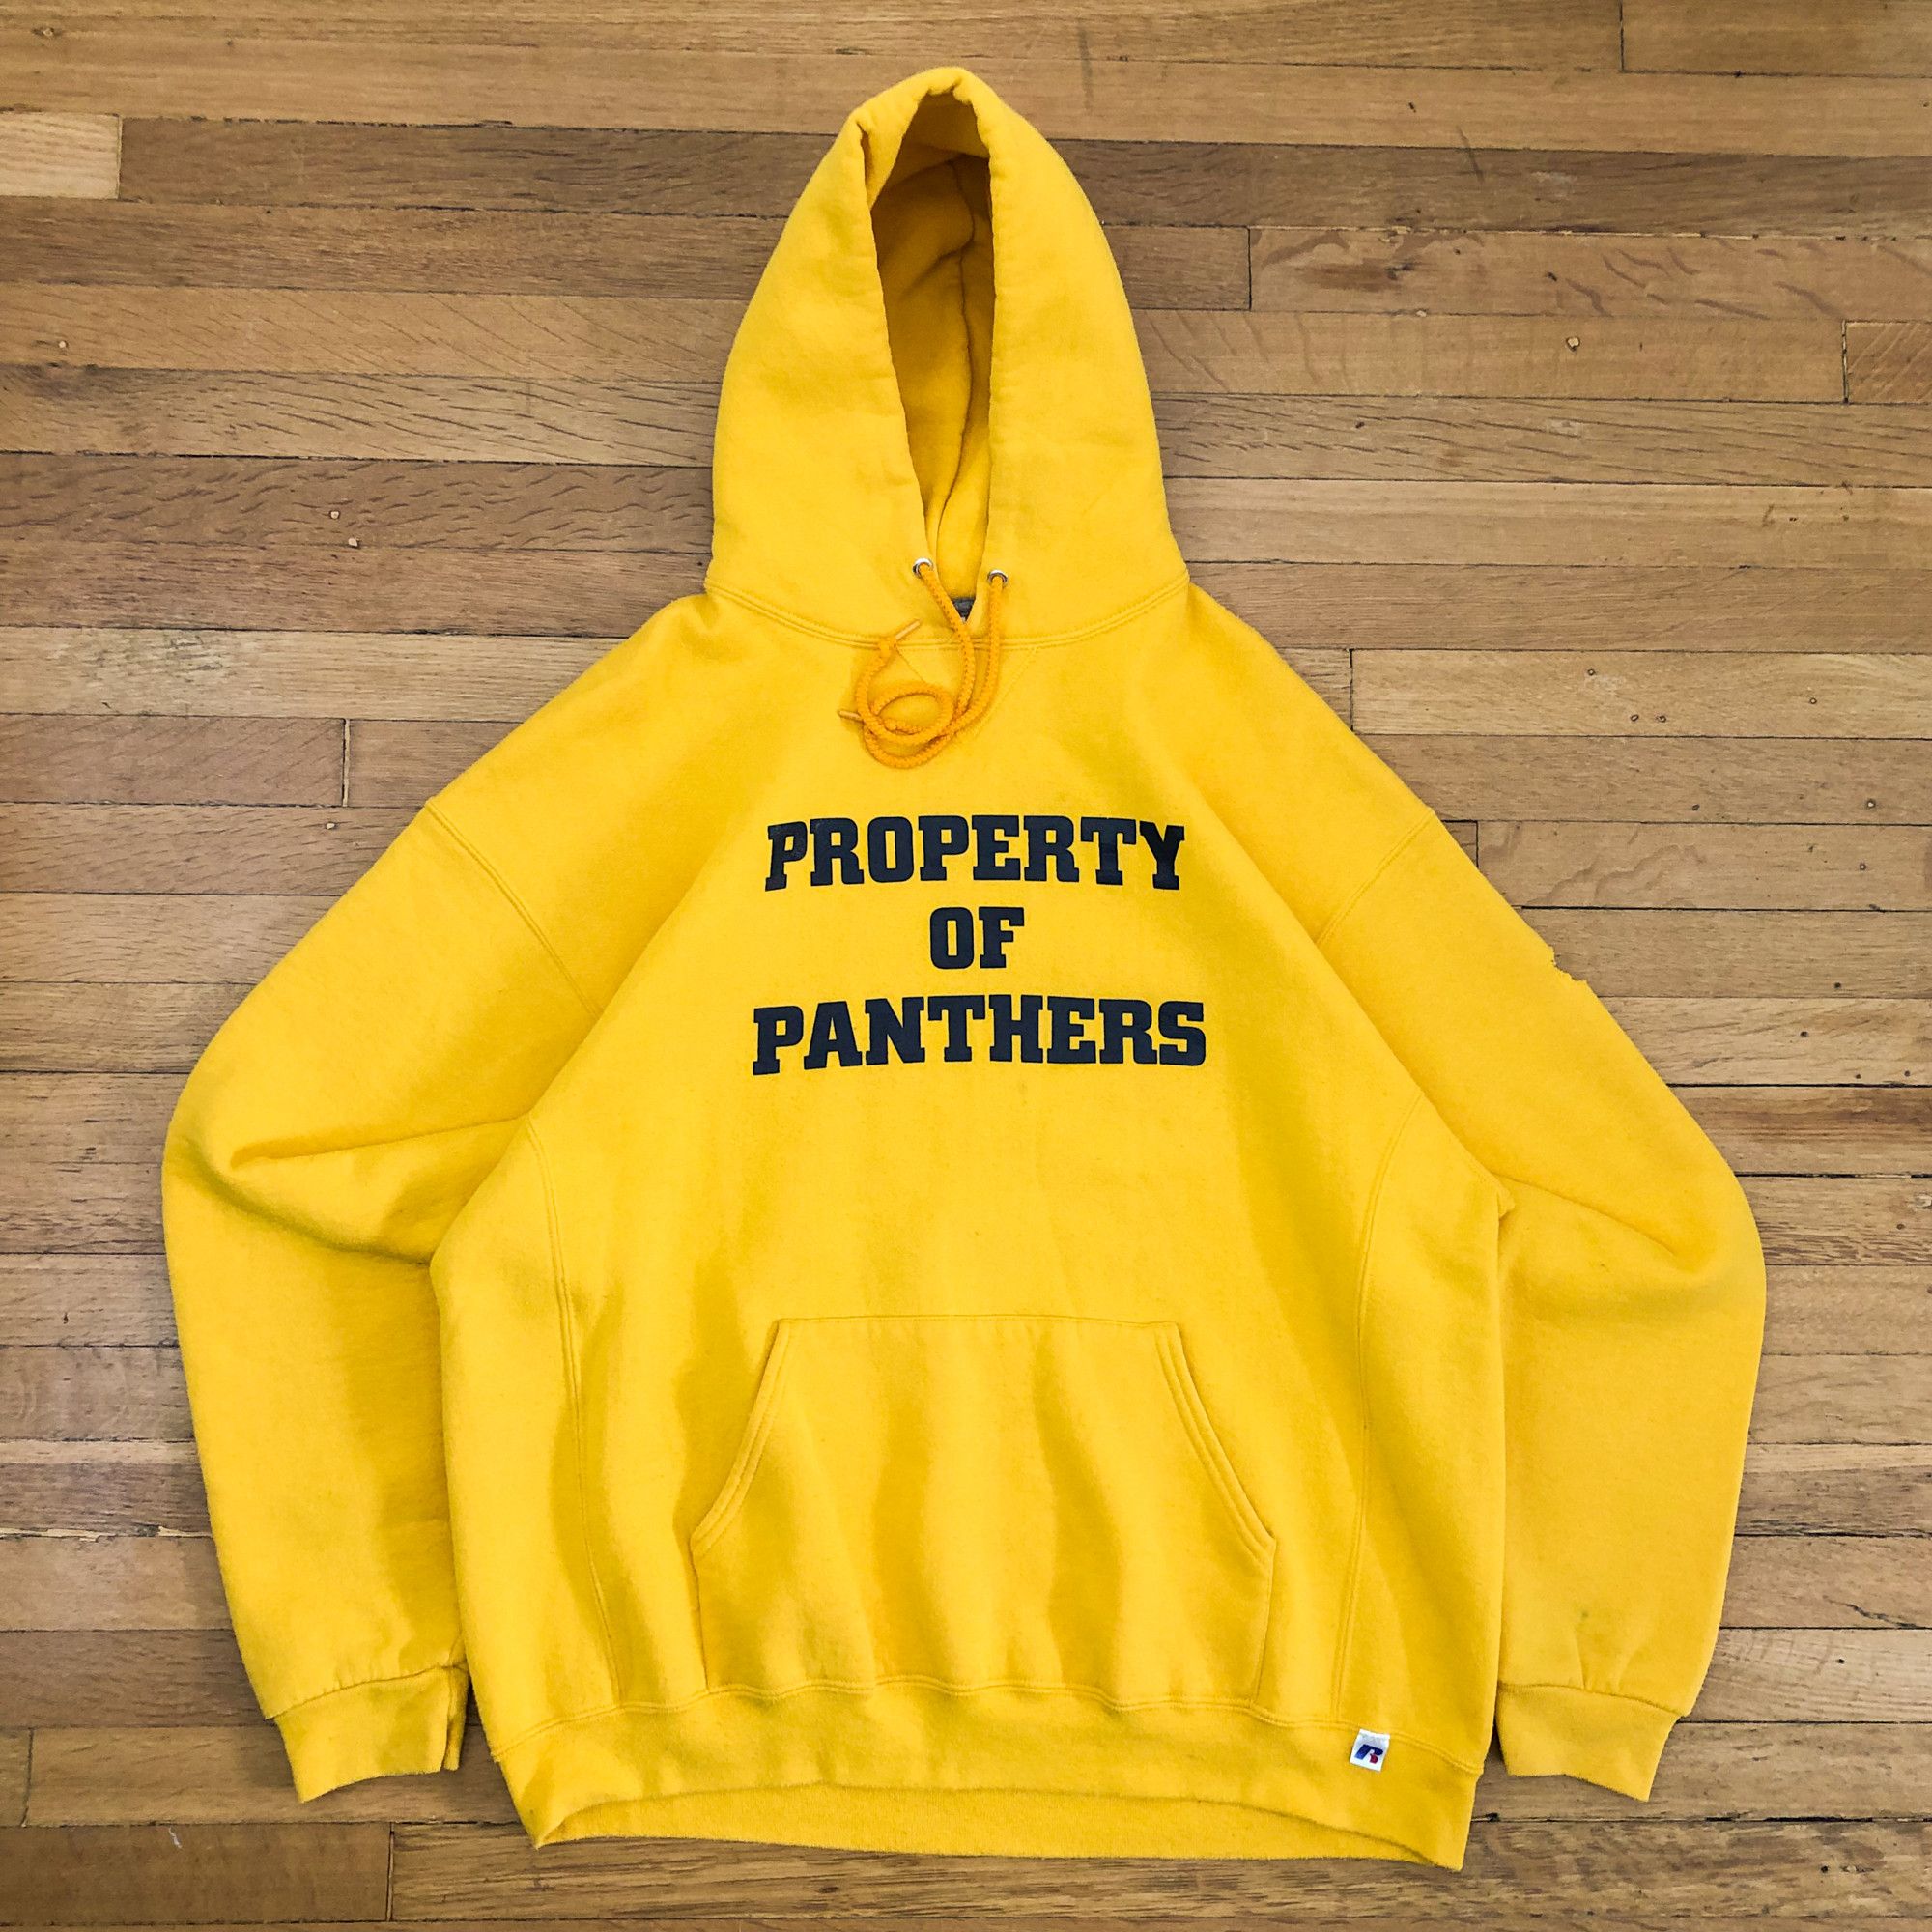 Russell Athletic 2000s Boxy 'Property of Panthers' Russell Athletic Hoodie Size US XL / EU 56 / 4 - 2 Preview